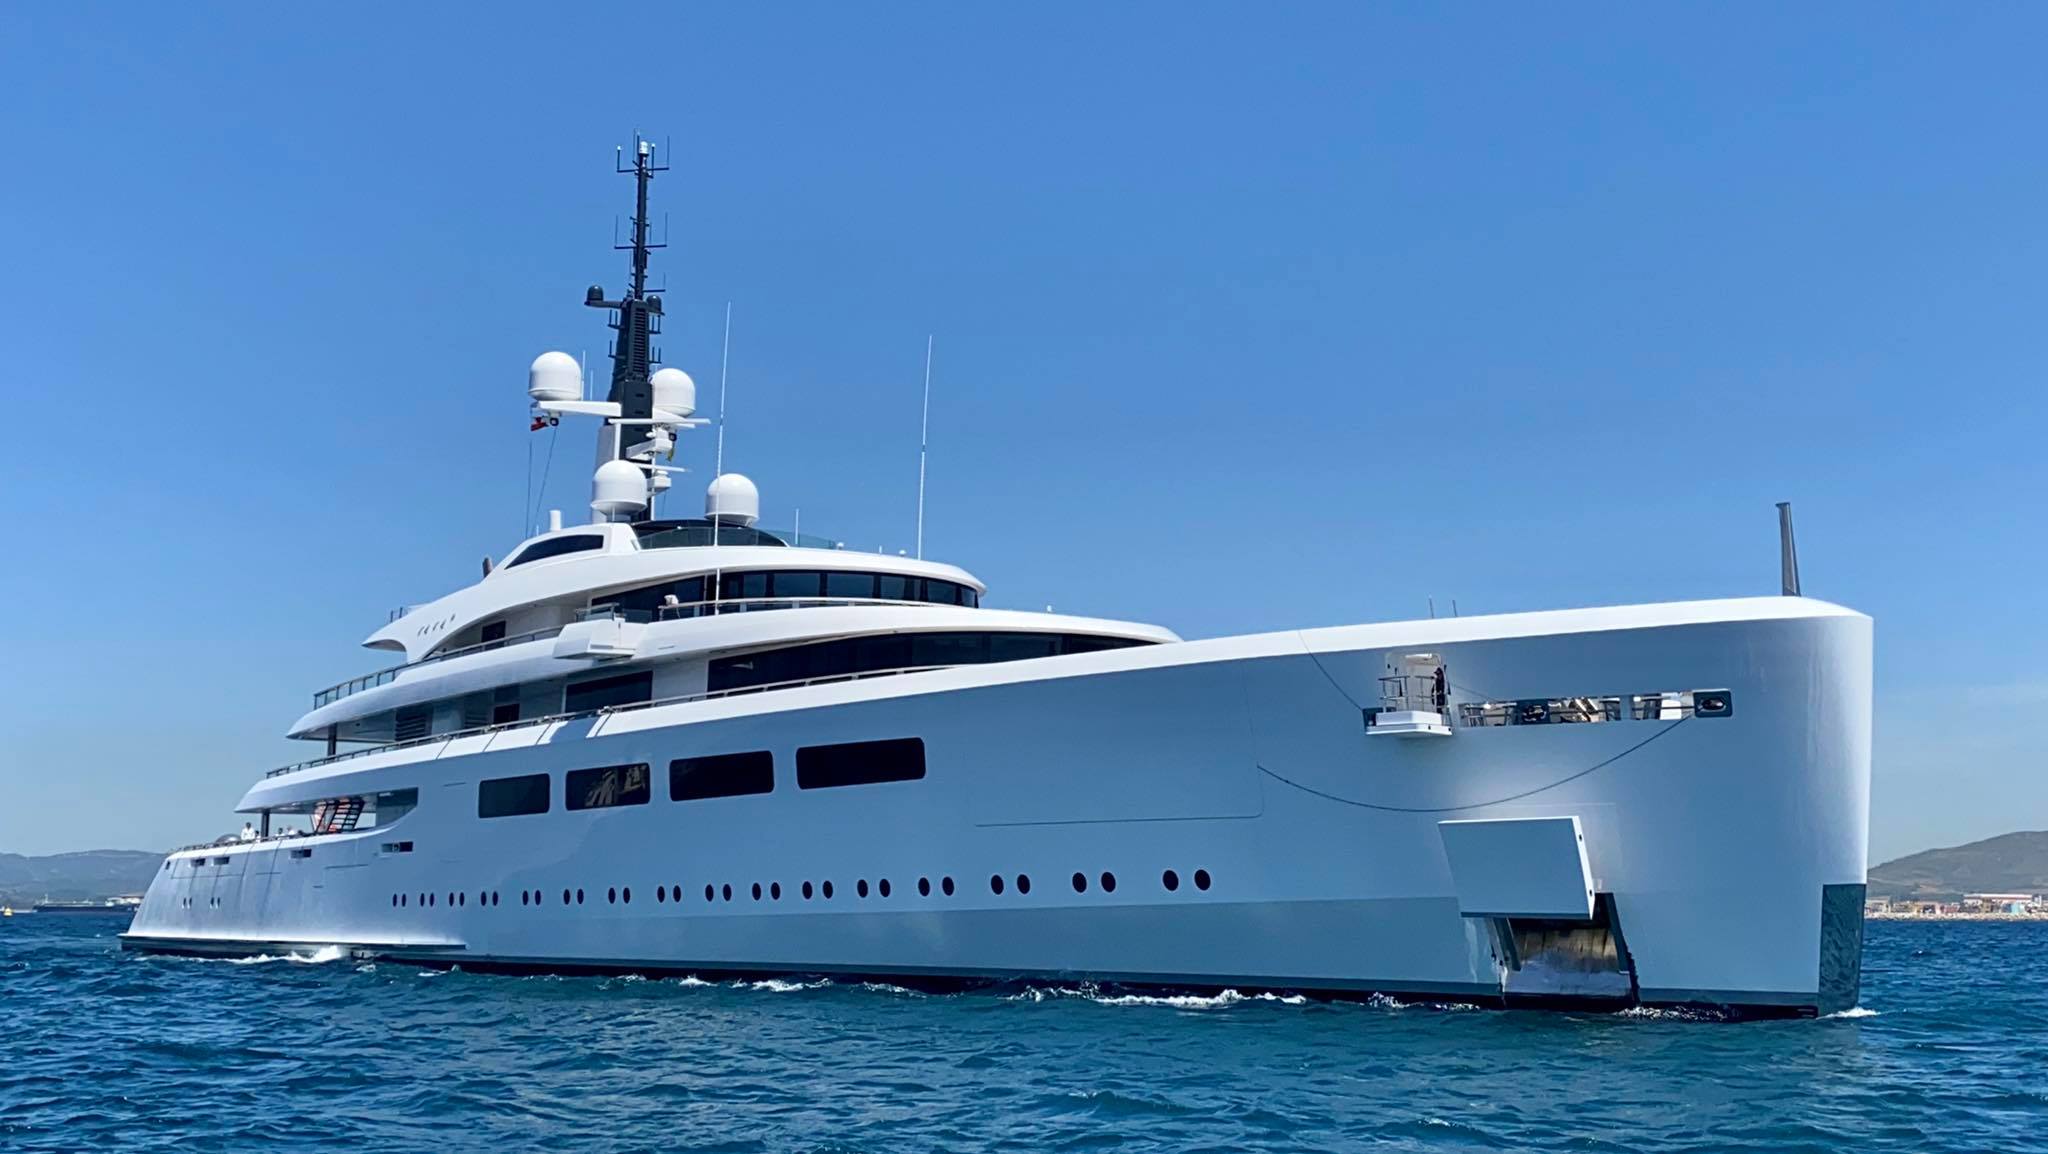 The 96-meter yacht VAVA II in Gibraltar (owned by Ernesto Bertarelli)